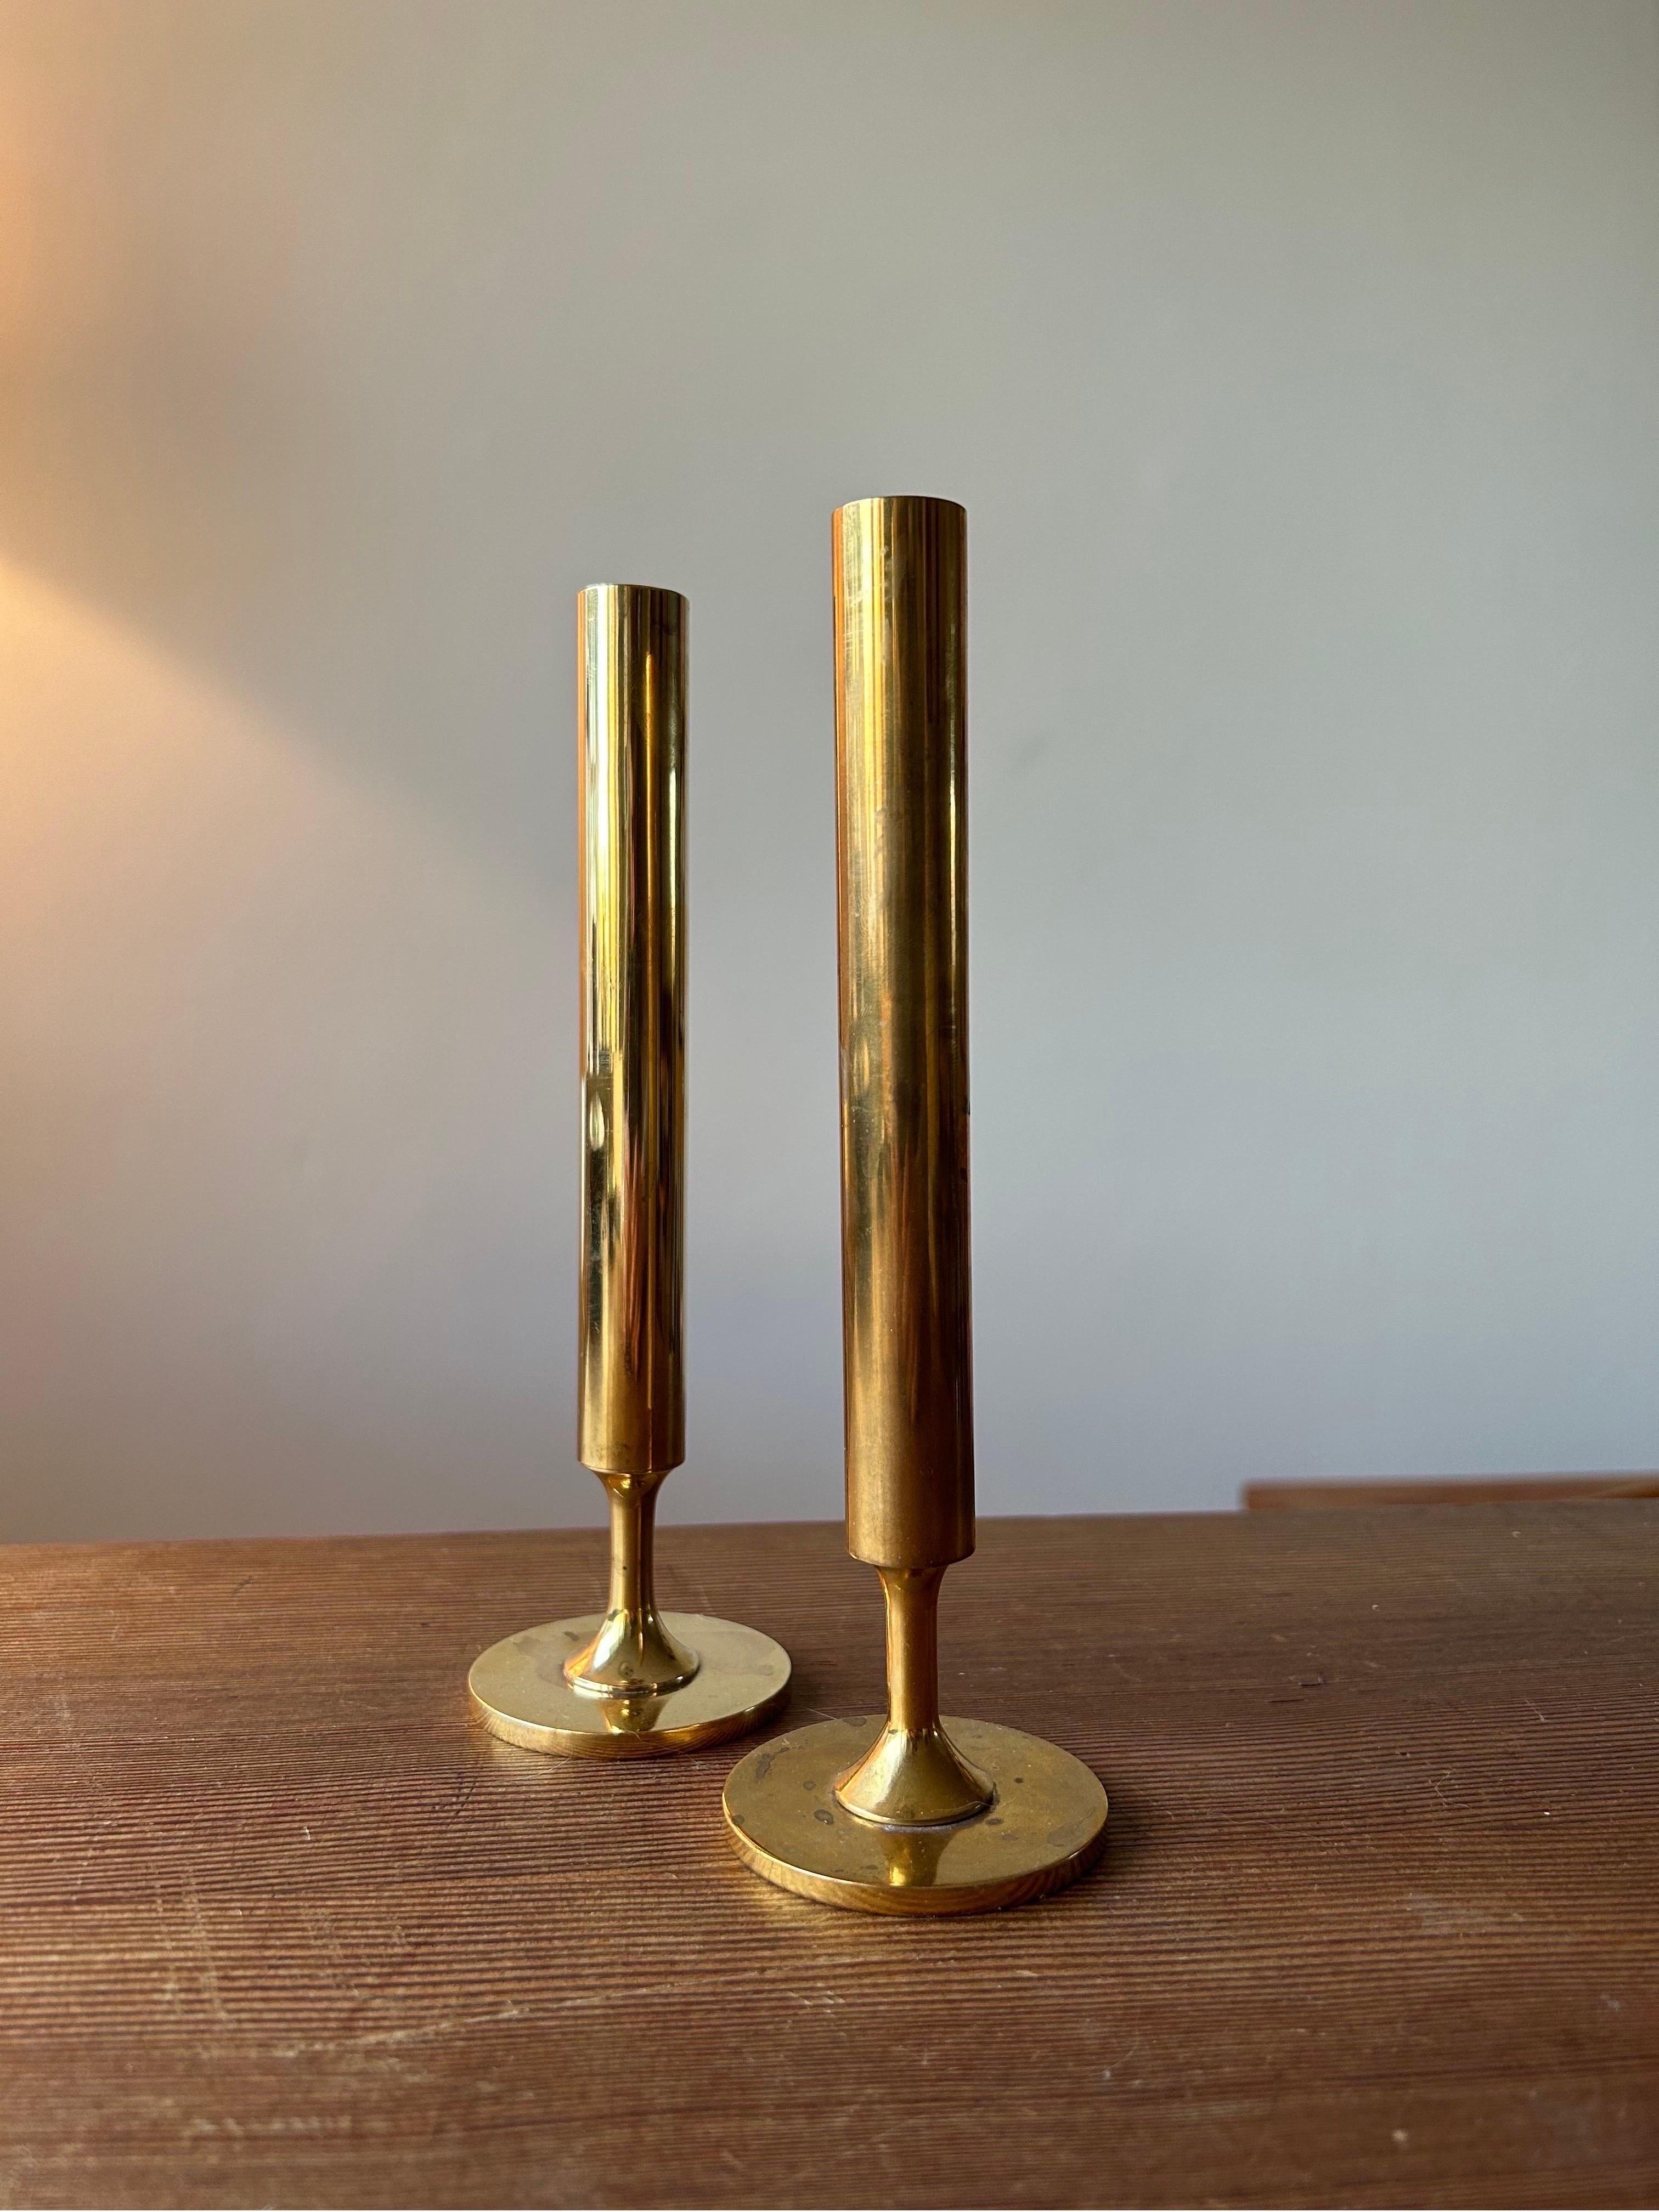 Pair of patinaed brass vases by Pierre Forssell for Skultuna.
Perfect set of vases for a single flower each or as a decorative object in the interior. 
The vases are made in solid brass which over the years has gotten a beautiful patina.

The